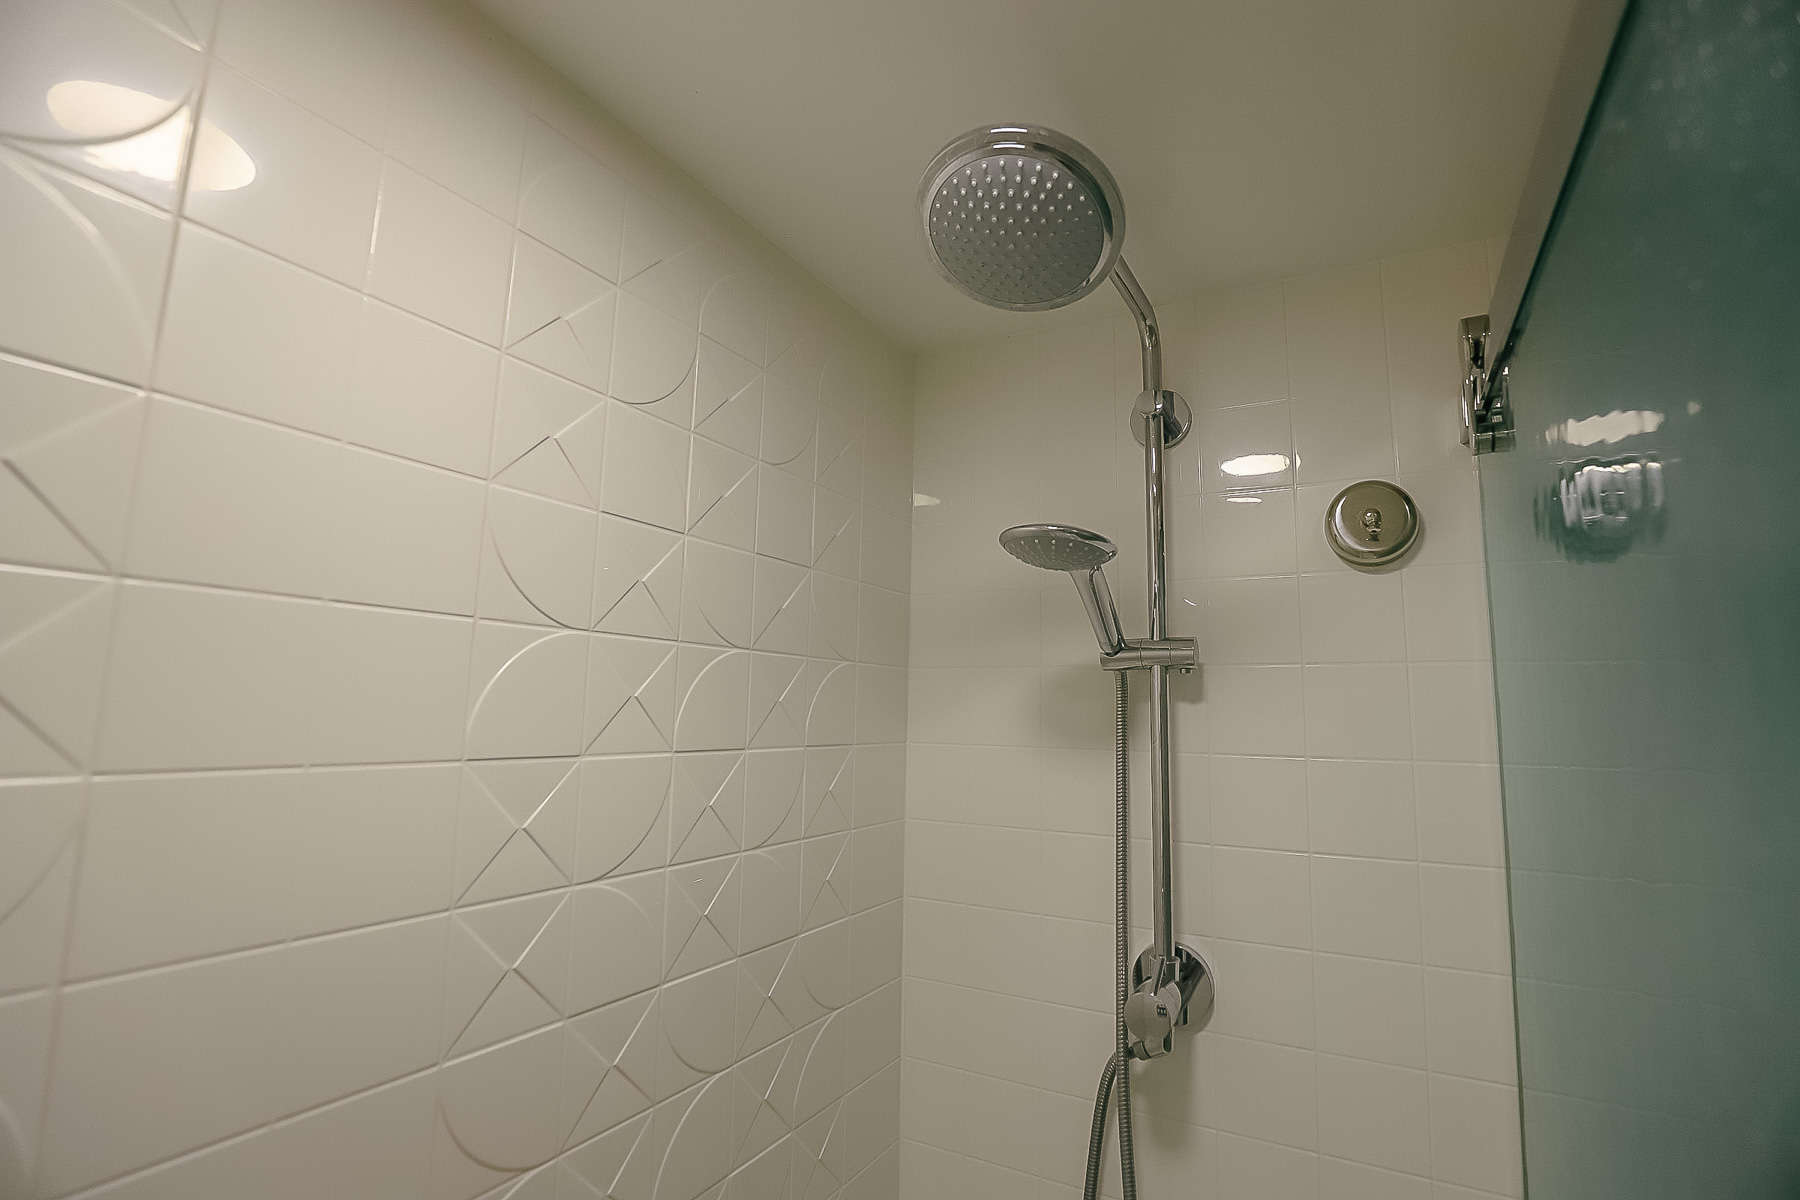 the shower fixtures with a detachable shower head